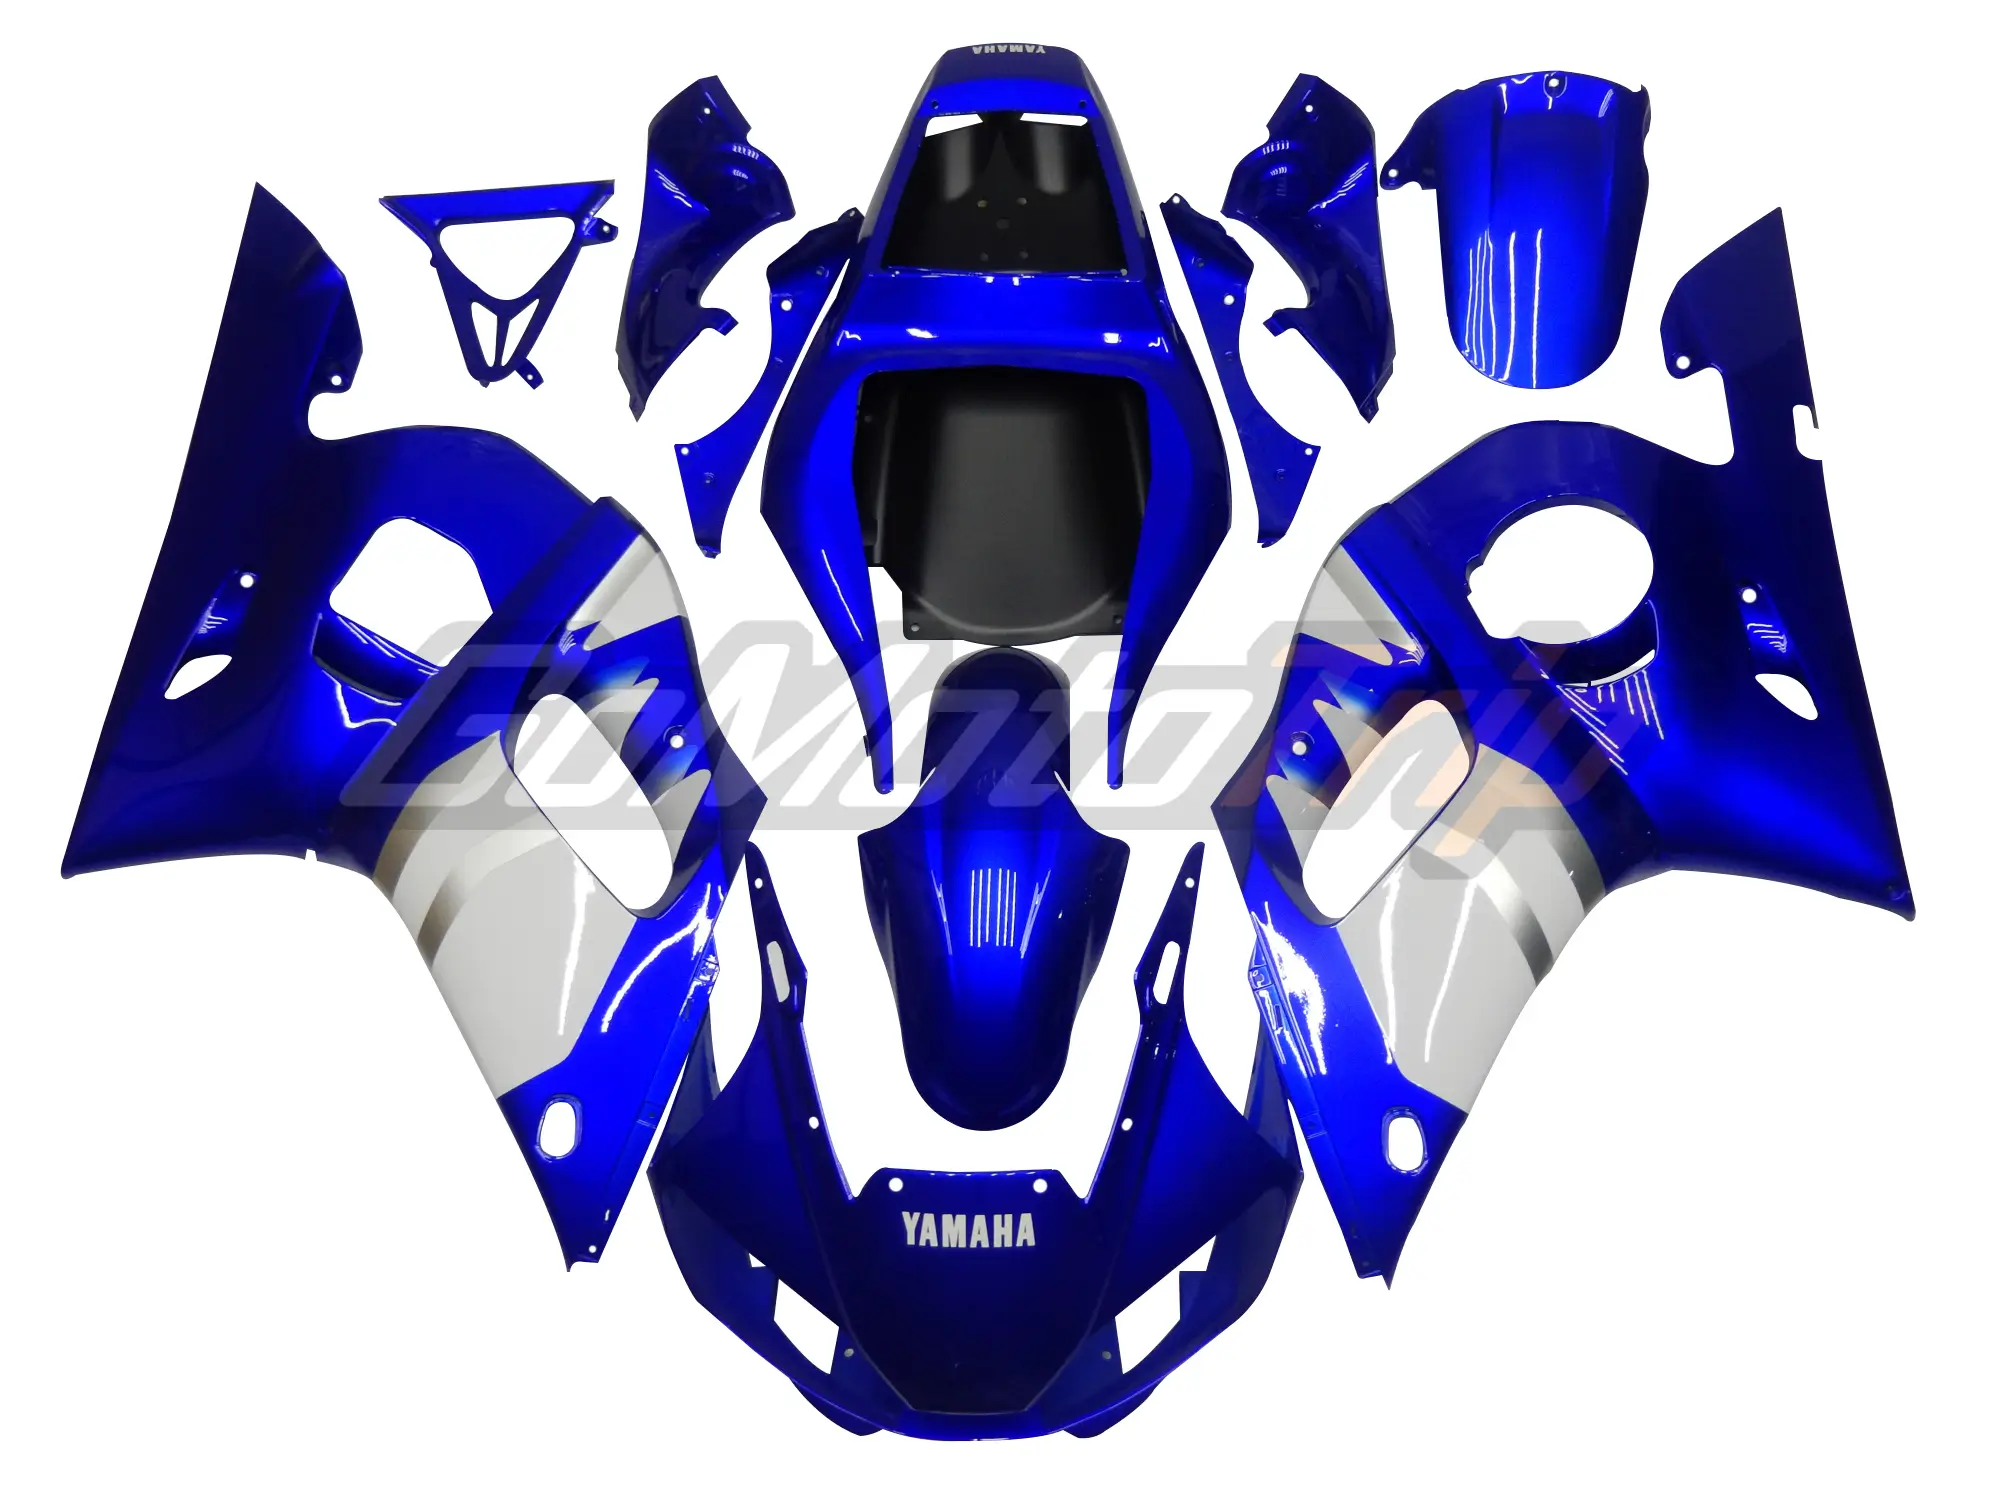 Complete Blue Black Fairing Fit for YAMAHA 2006 2007 YZF R6 Injection Mold ABS Plastics New Bodywork Bodyframe 06 07 